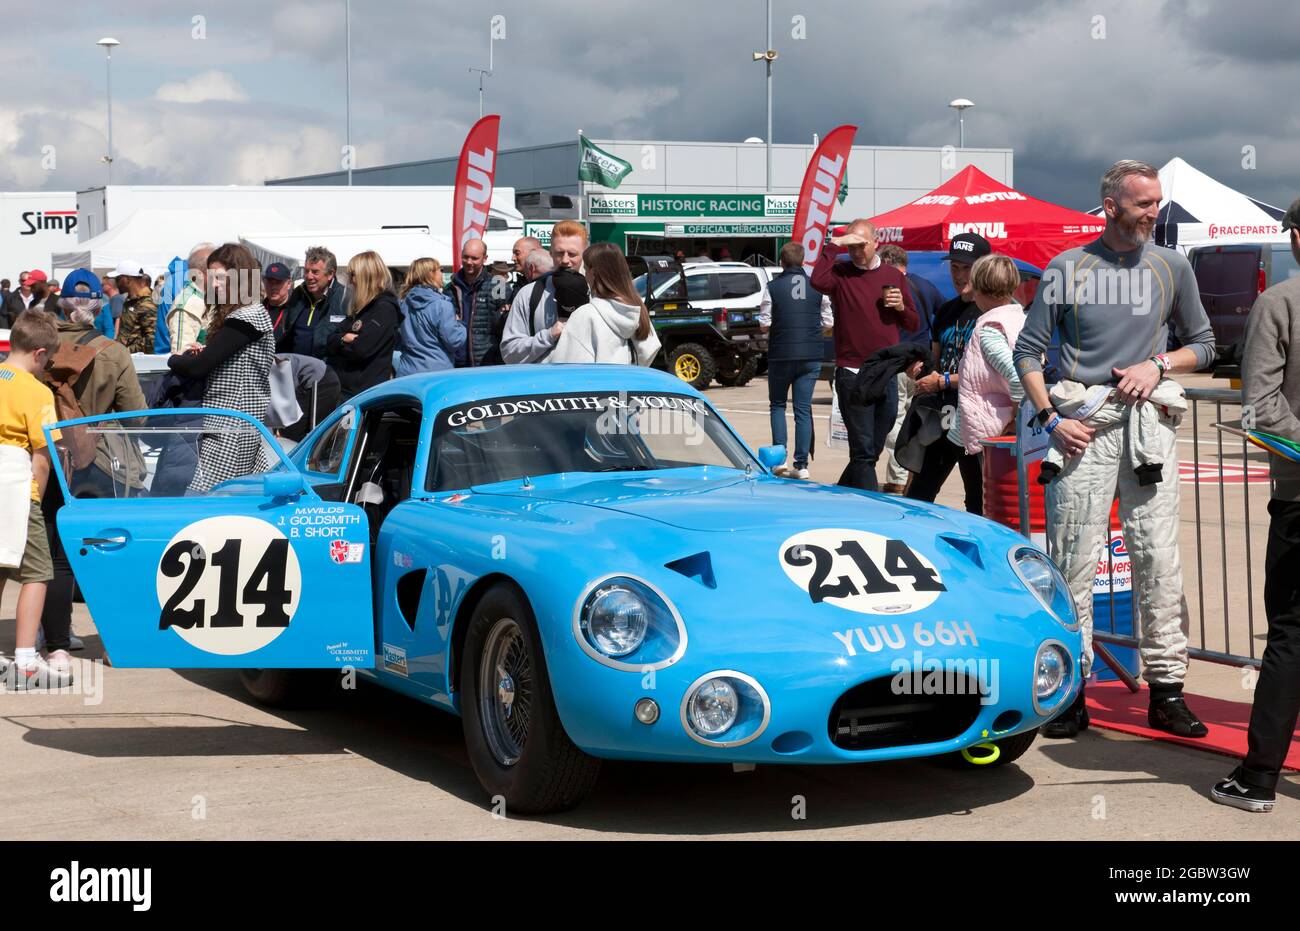 John Goldsmiths Blue Aston Martin DP214, in the International Paddock  awaiting the start of the International Trophy For Classic Pre-66 GT Cars race Stock Photo